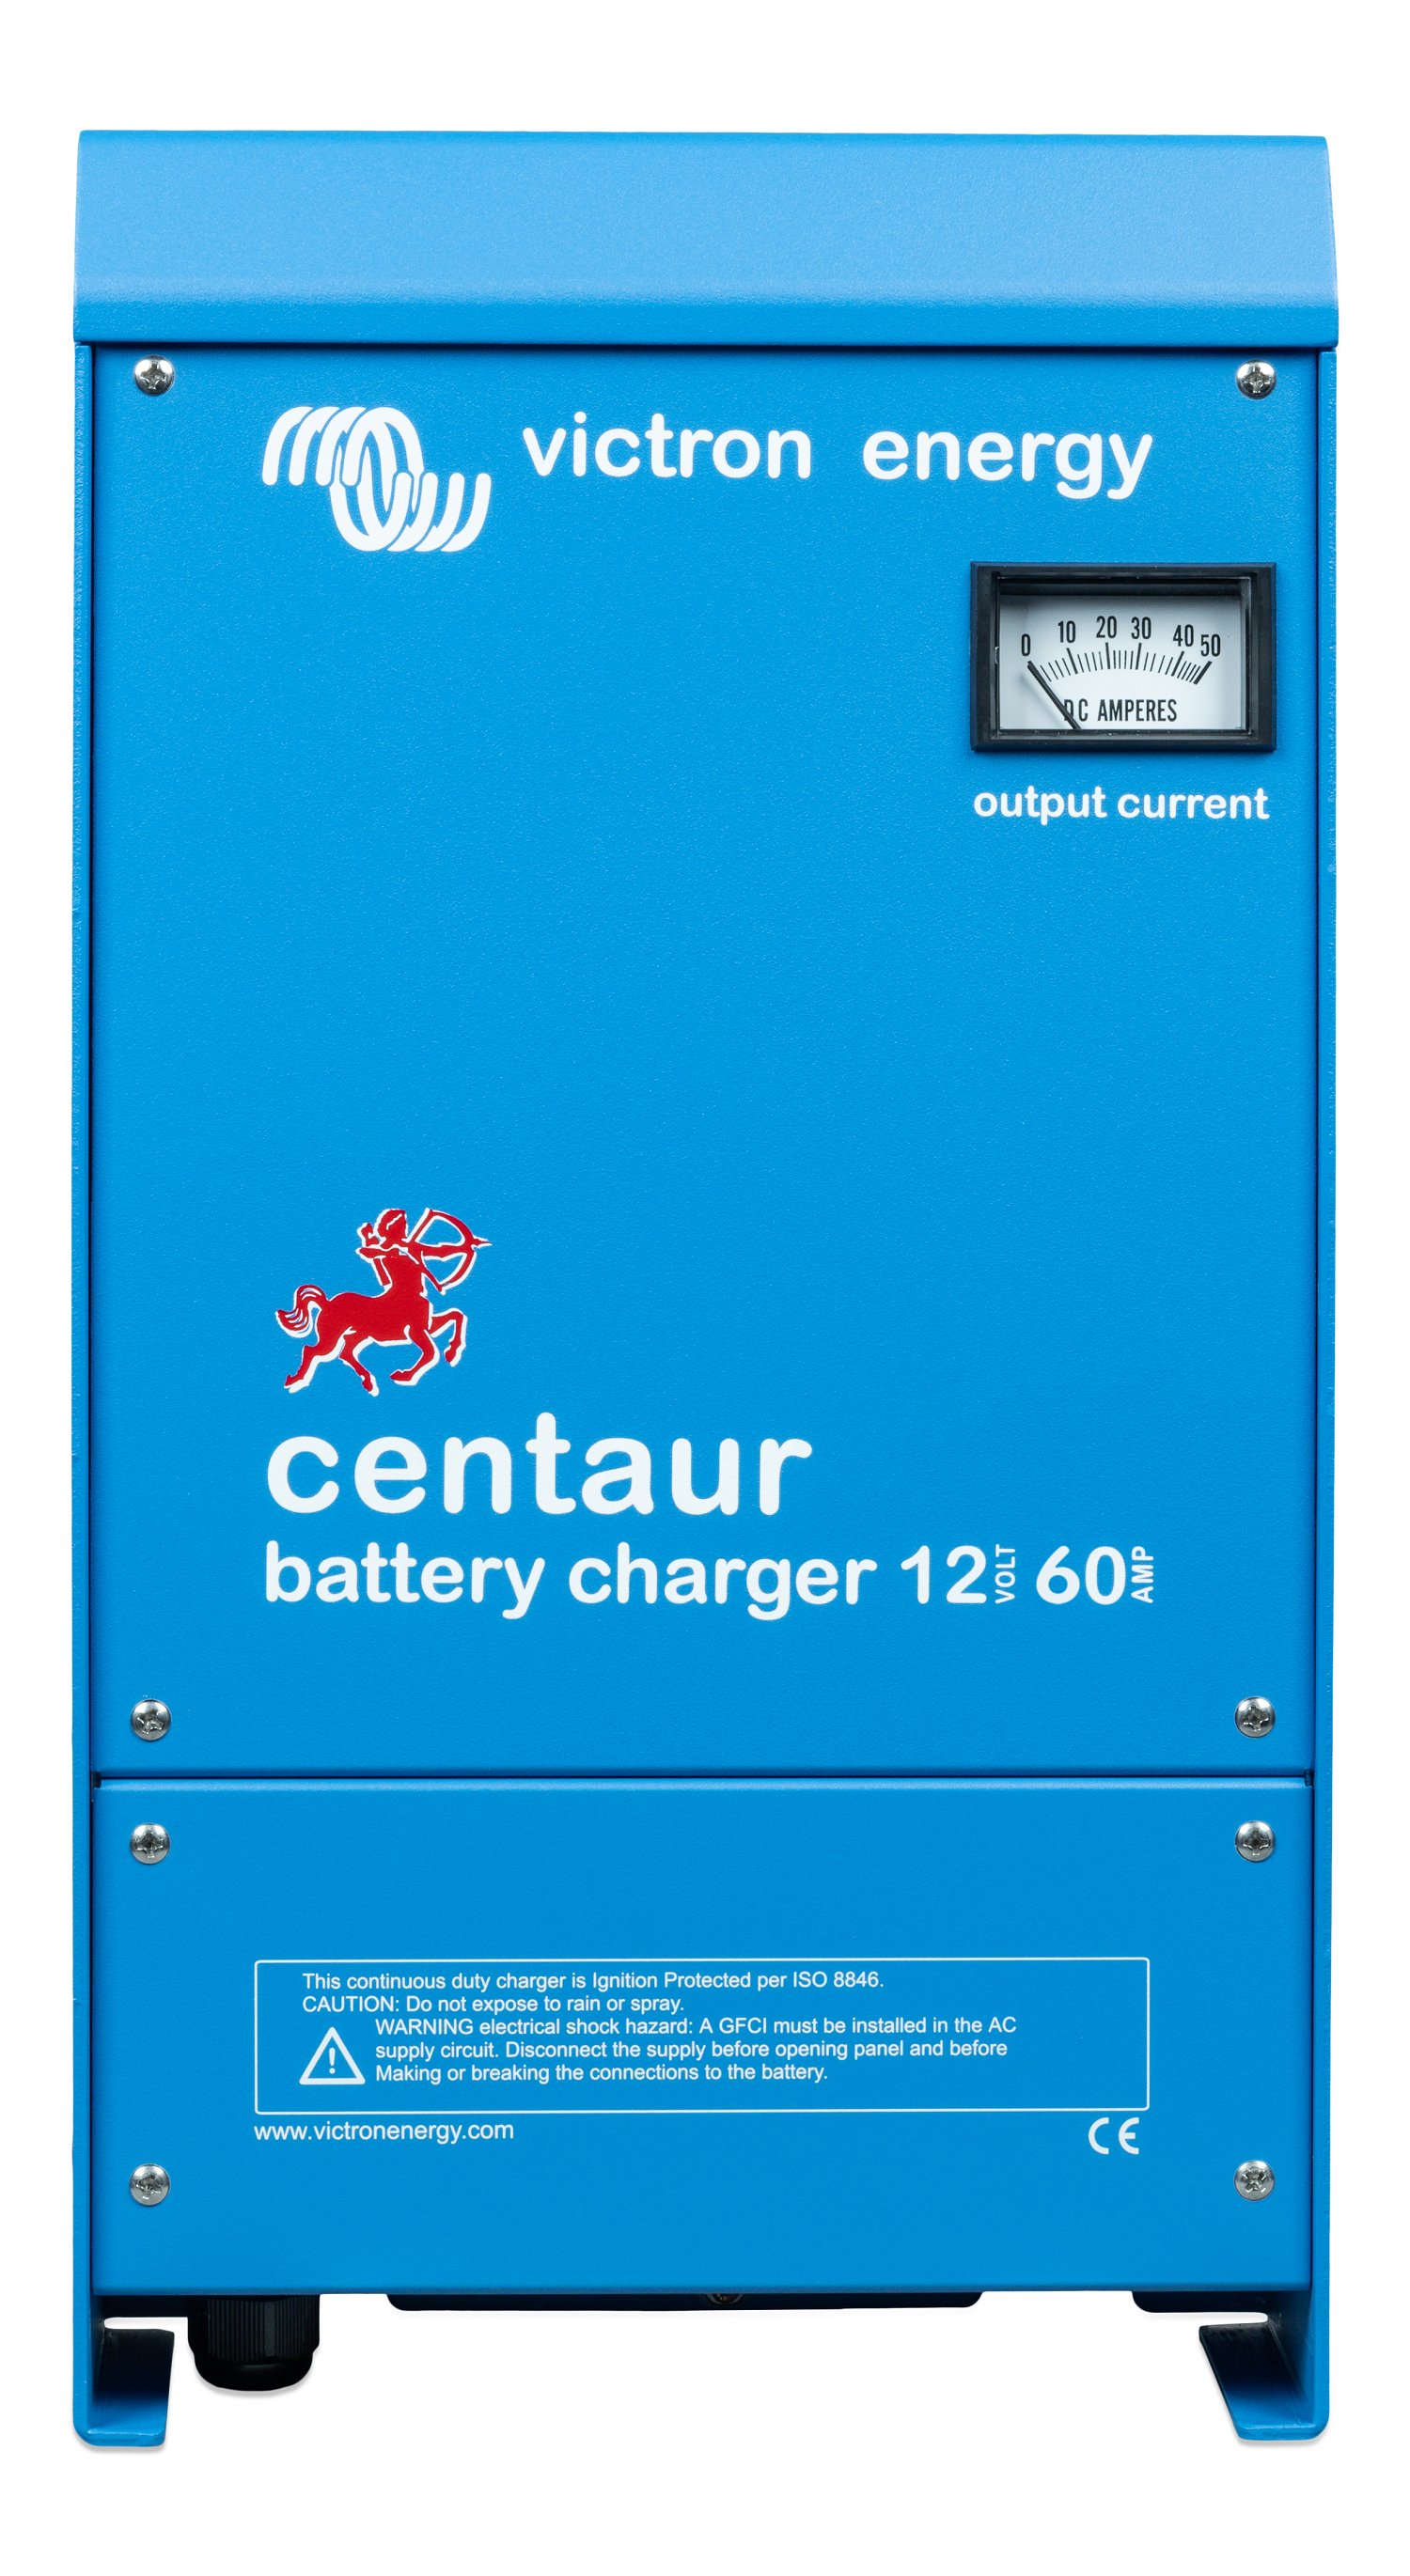 How big is the Victron Centaur 12 60 charger?